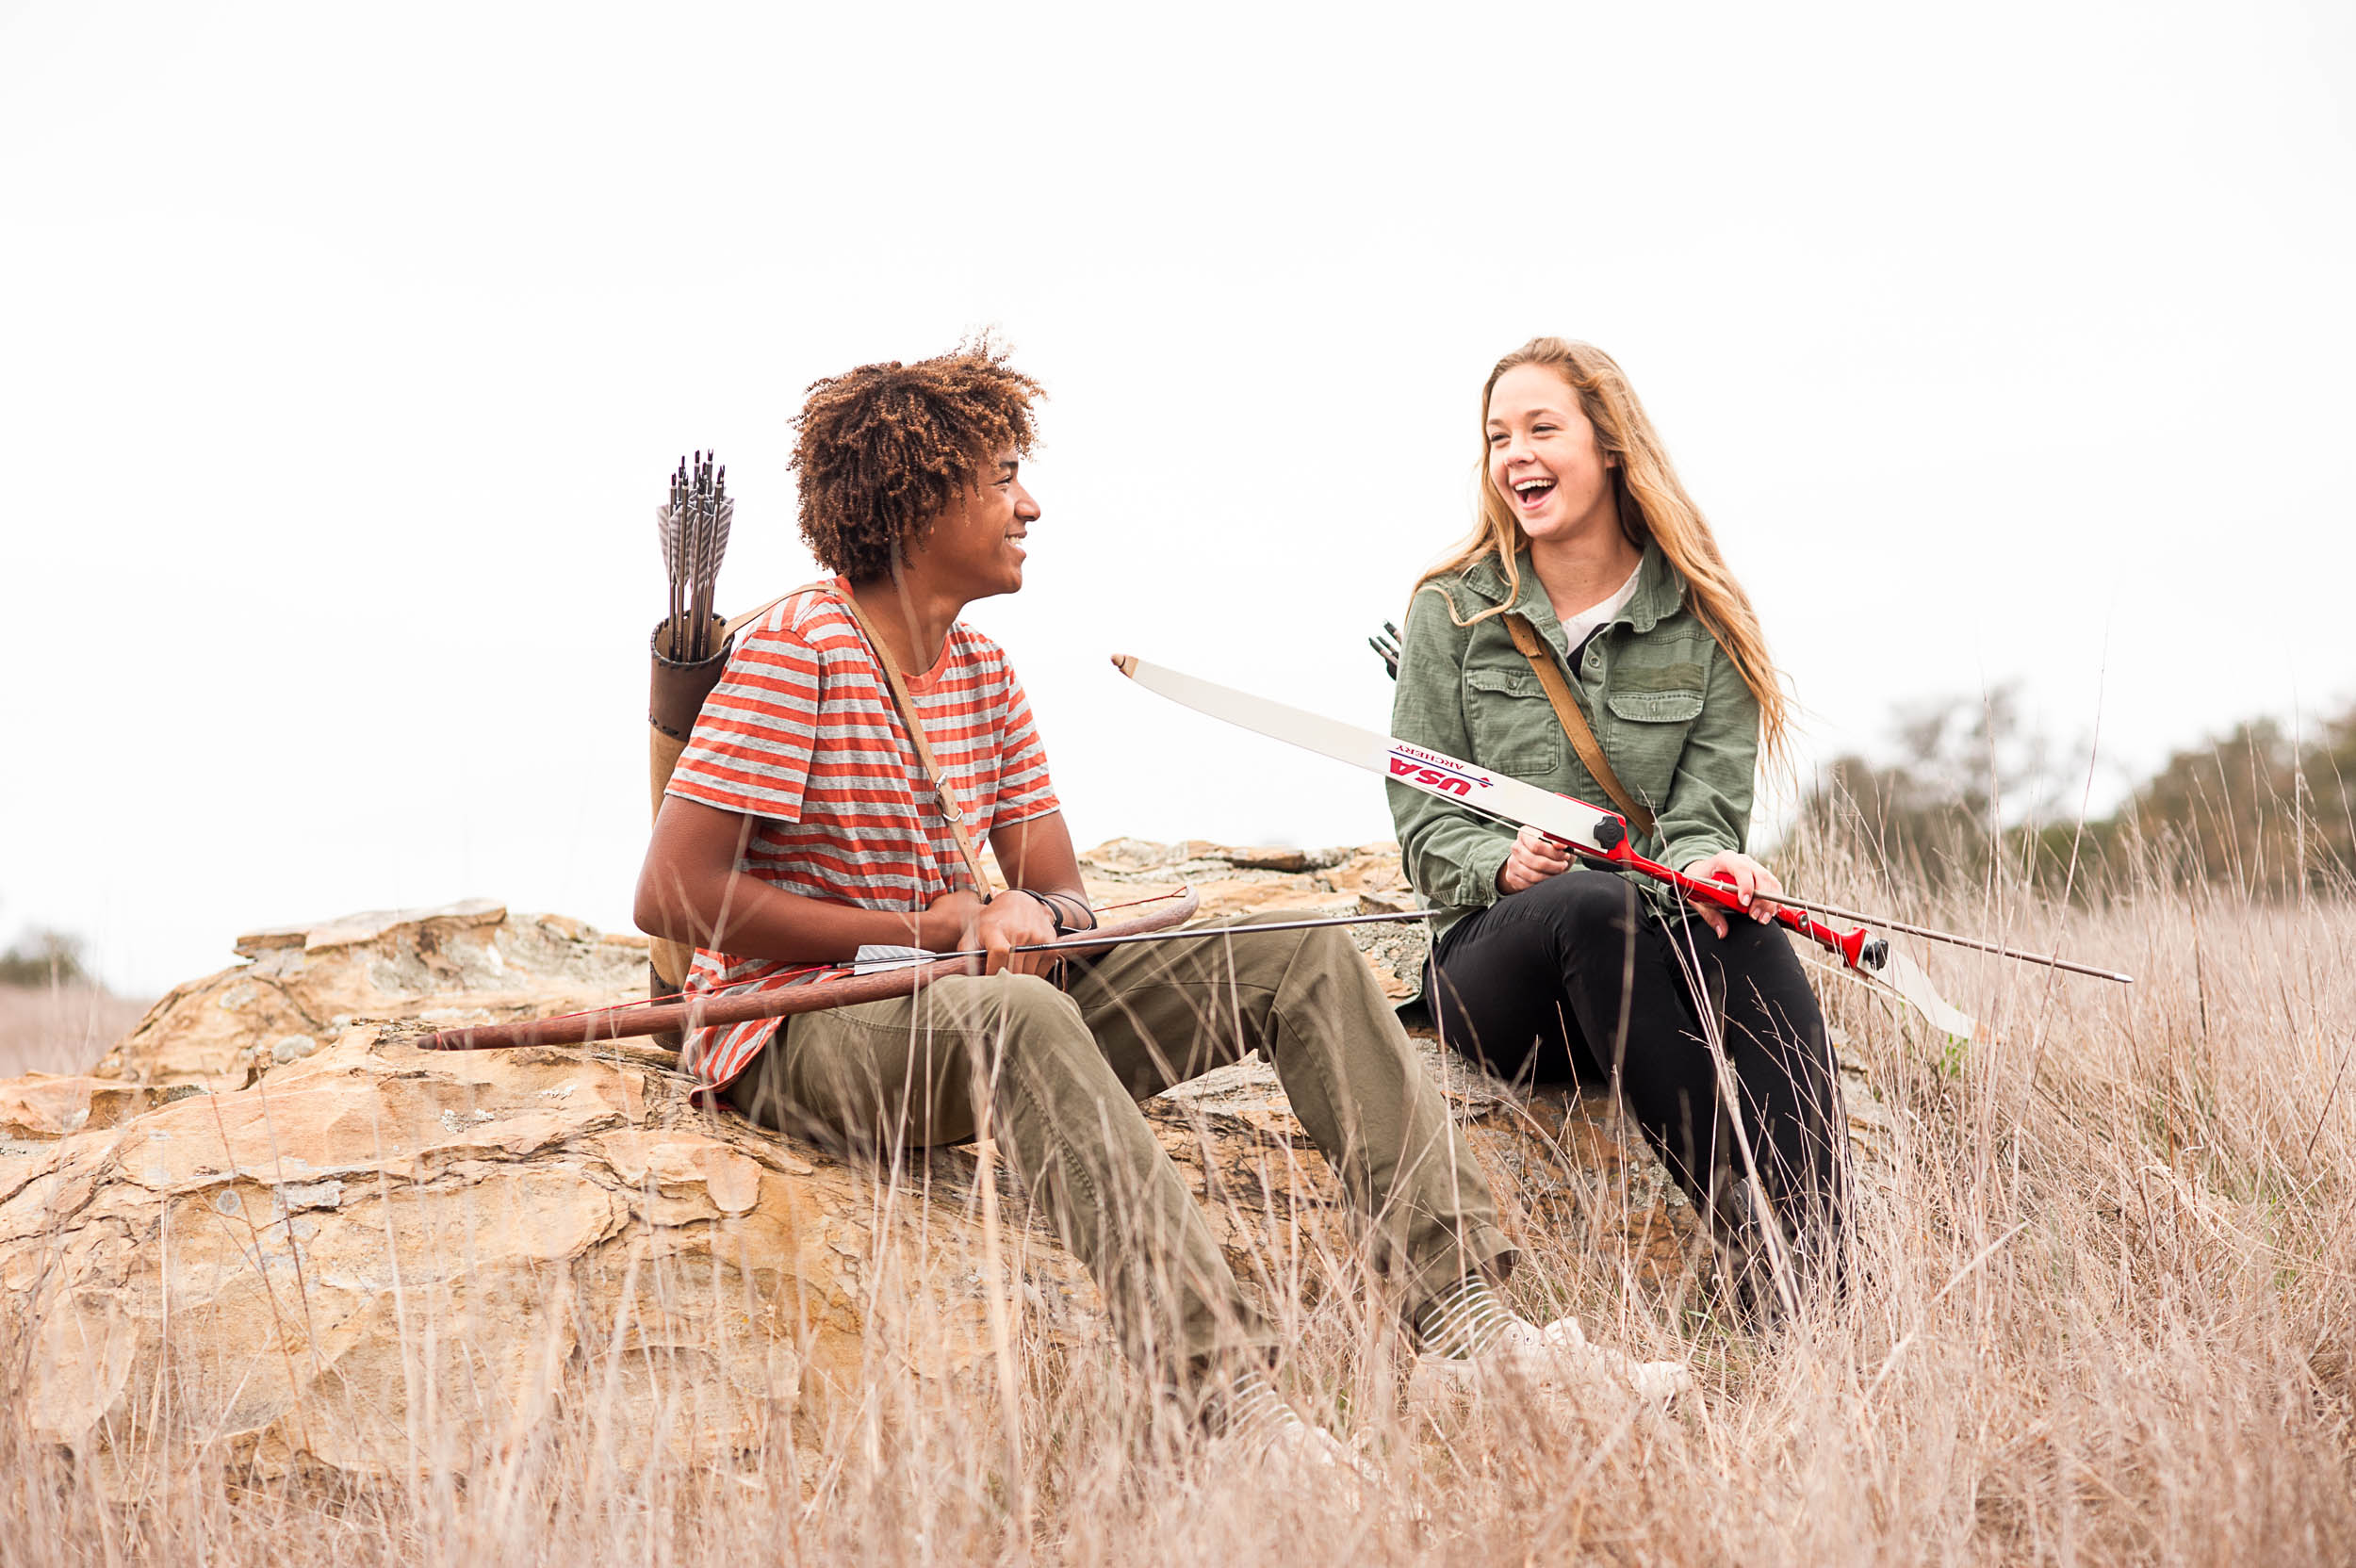 Two teenagers laugh outdoors for archery ad campaign in Malibu, Calif.